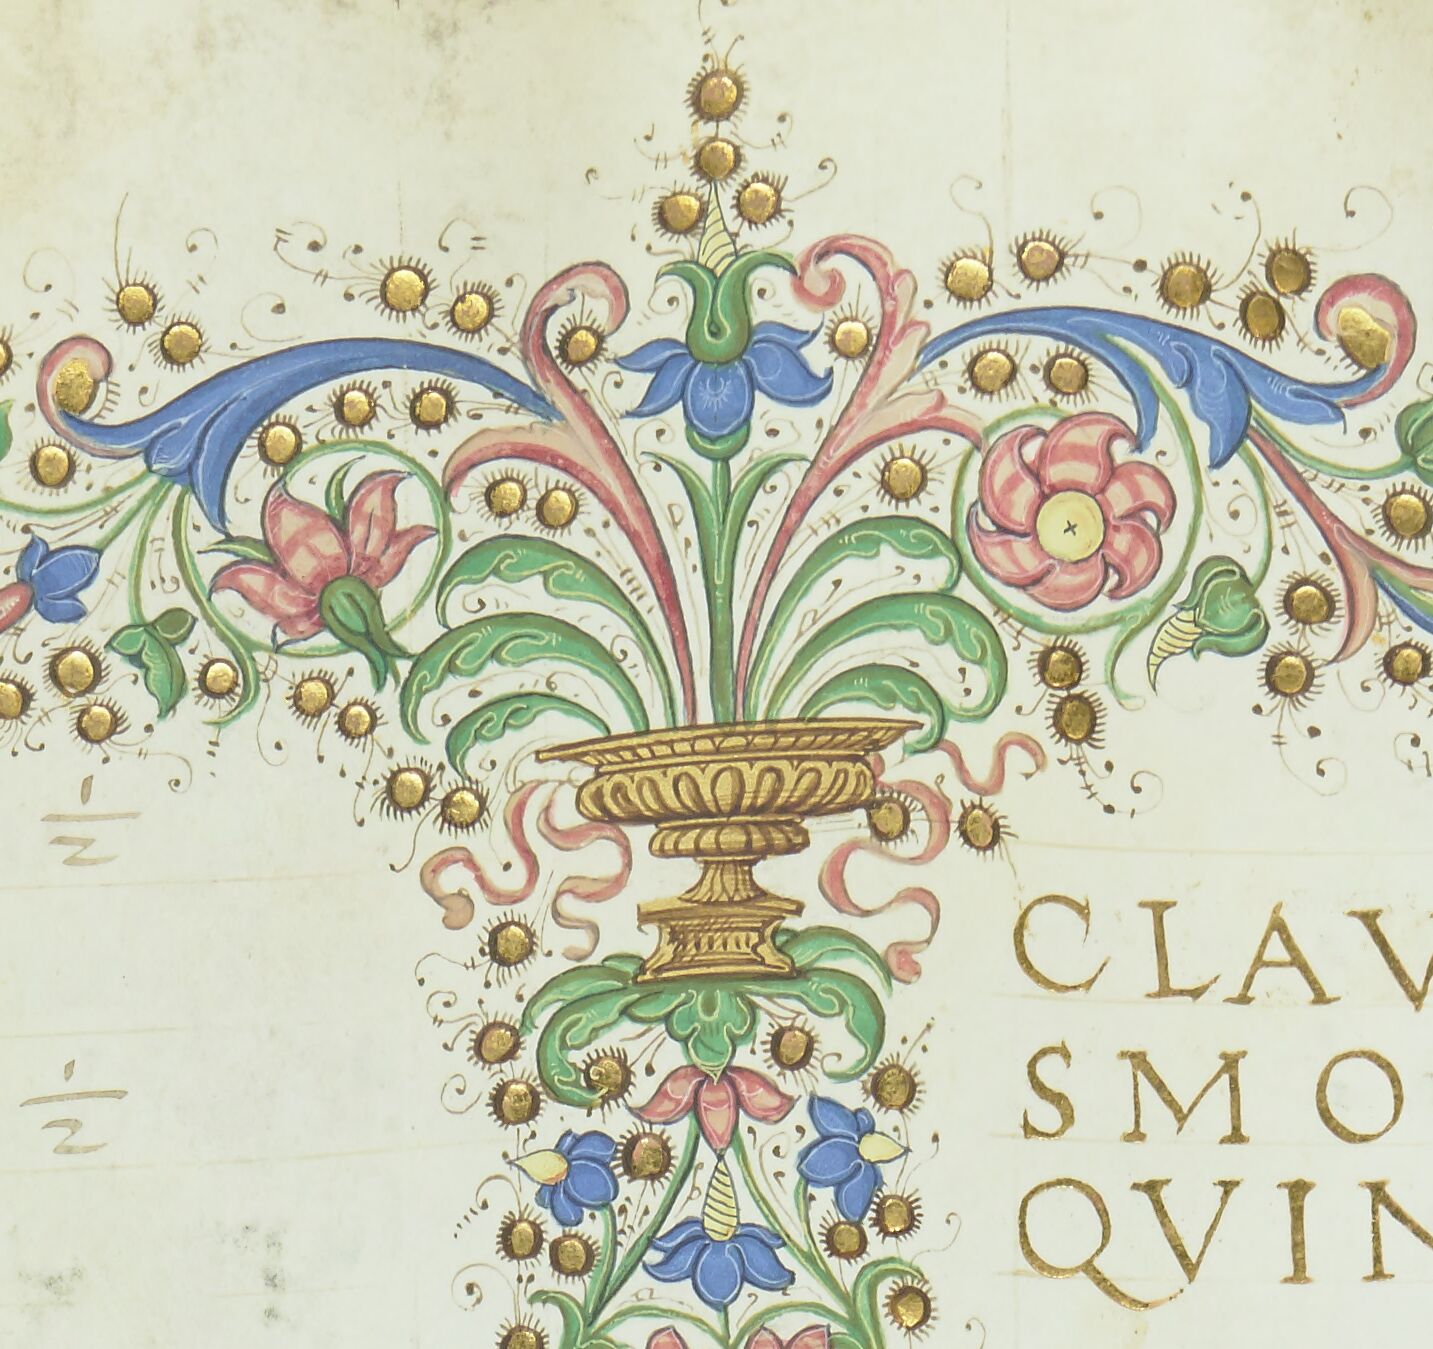 Floral border with bezants